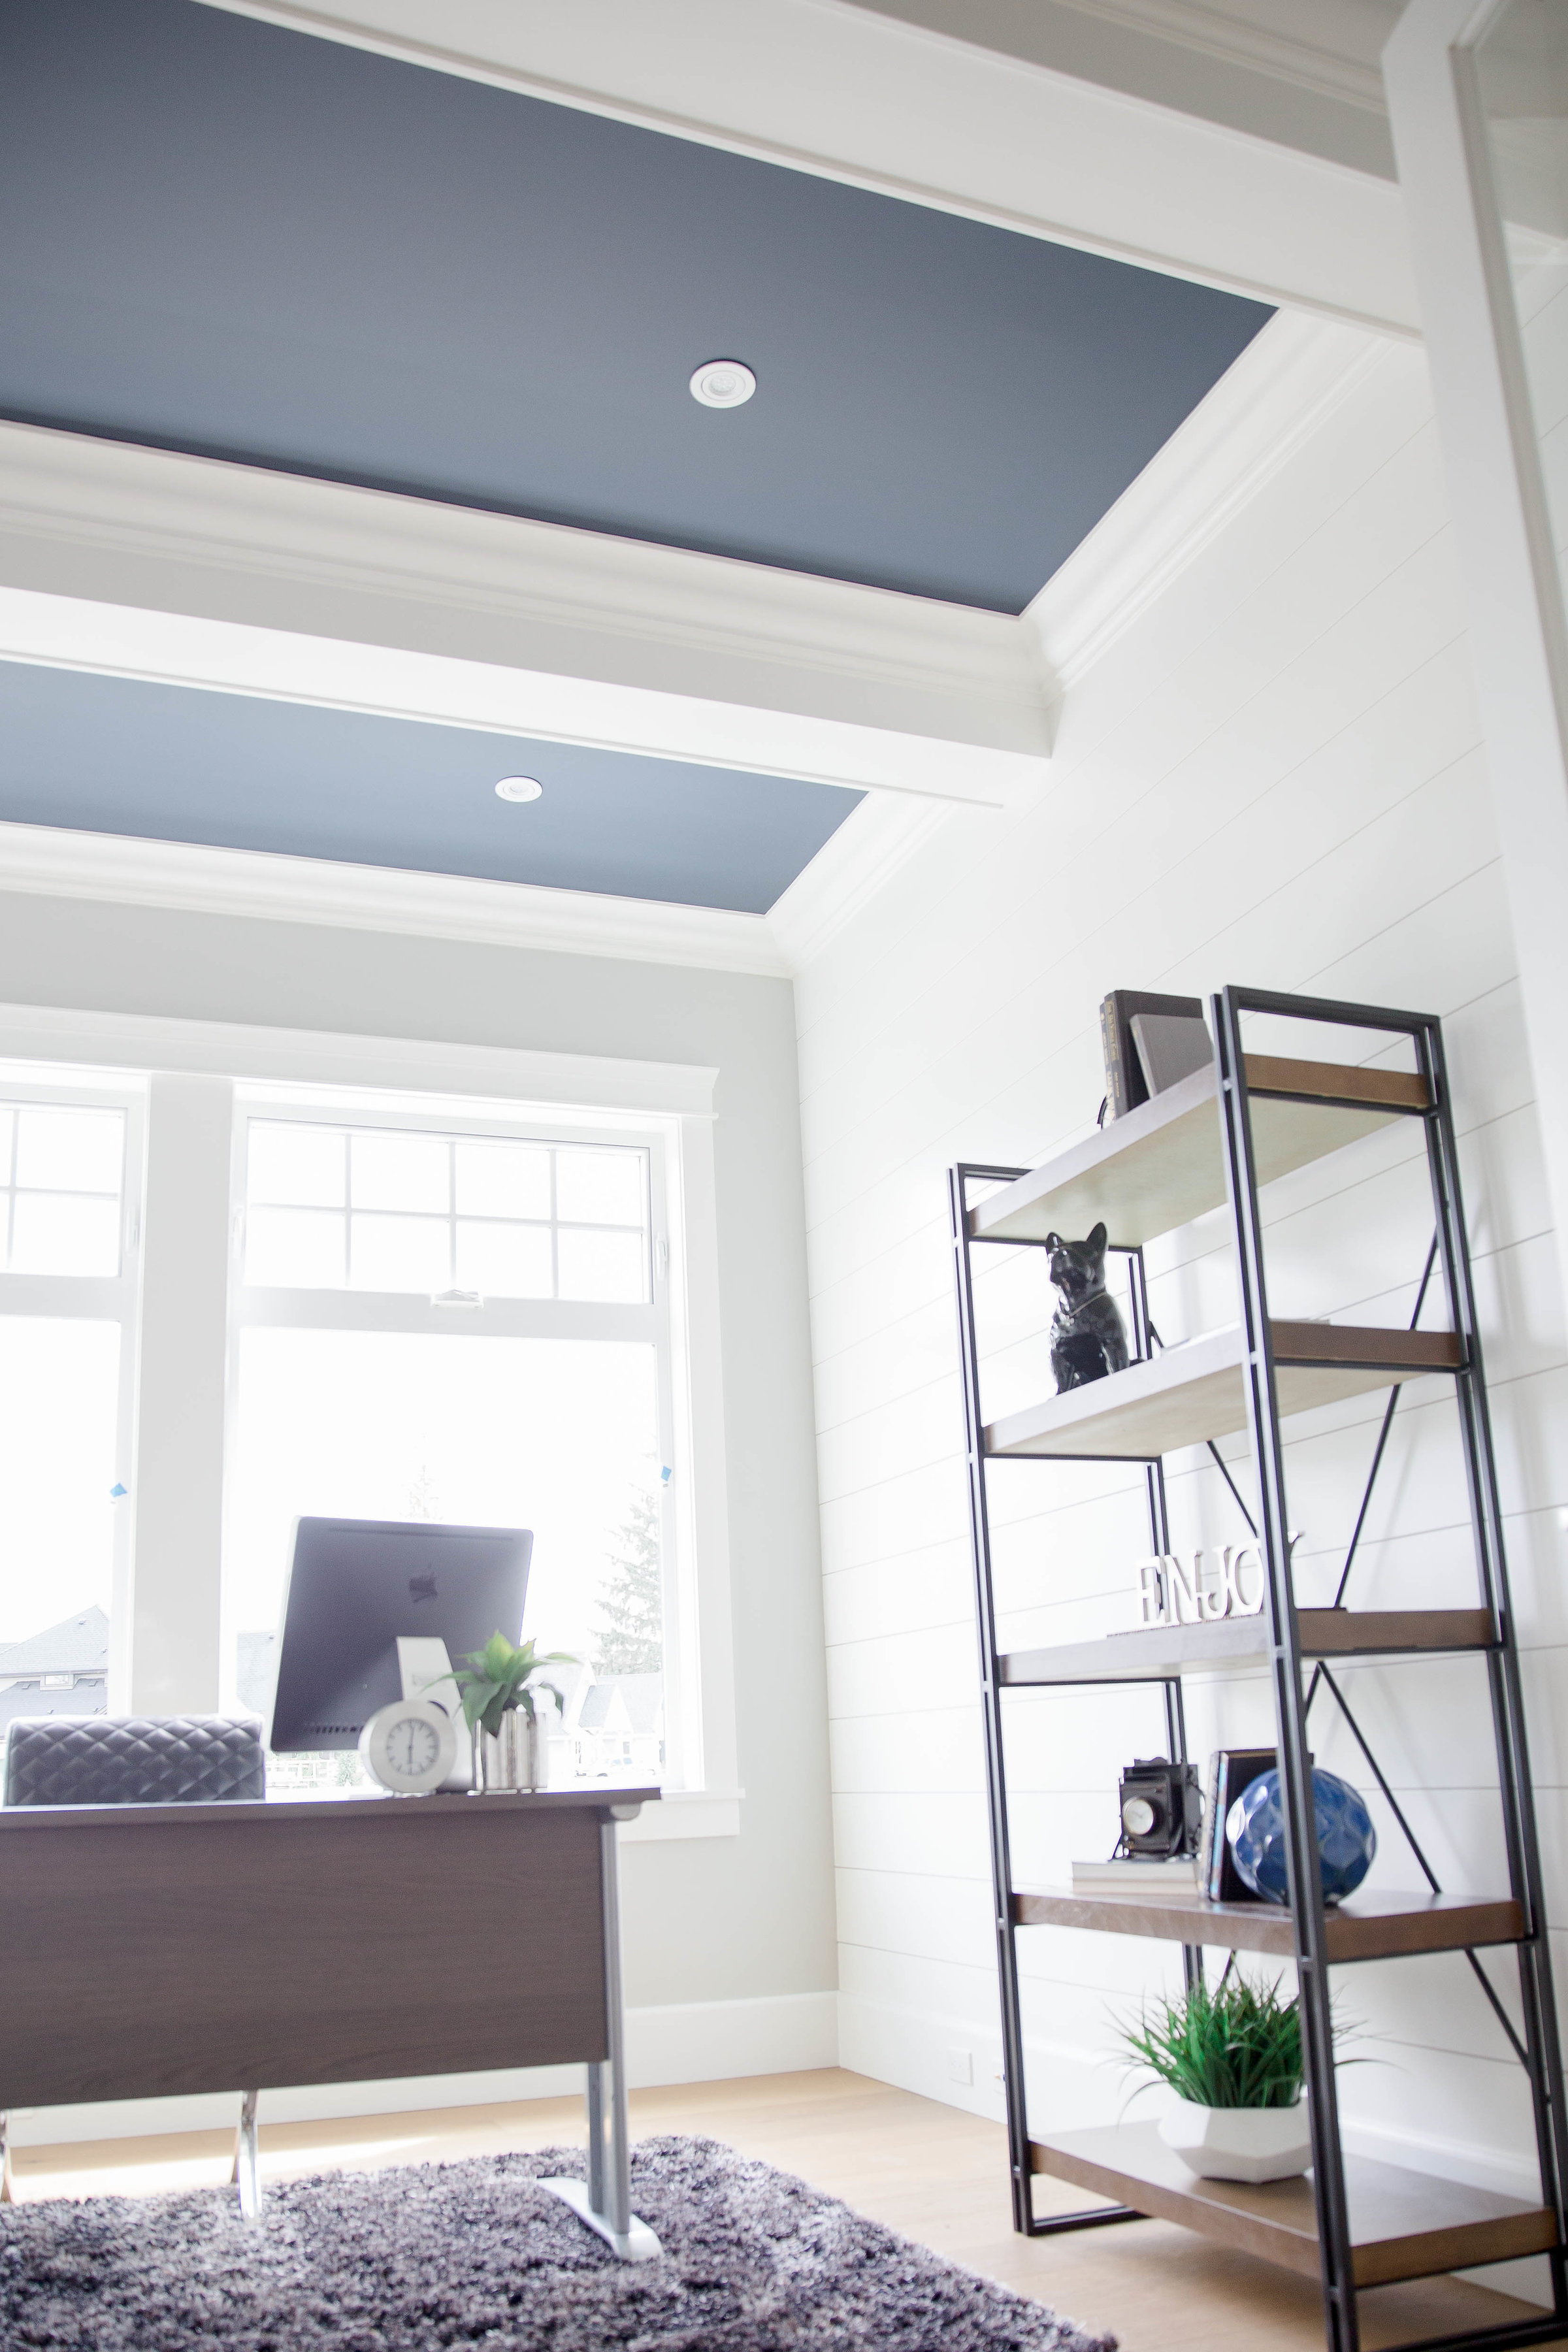 interior of office freshly painted white with navy ceiling panels. interior residential painting okanagan